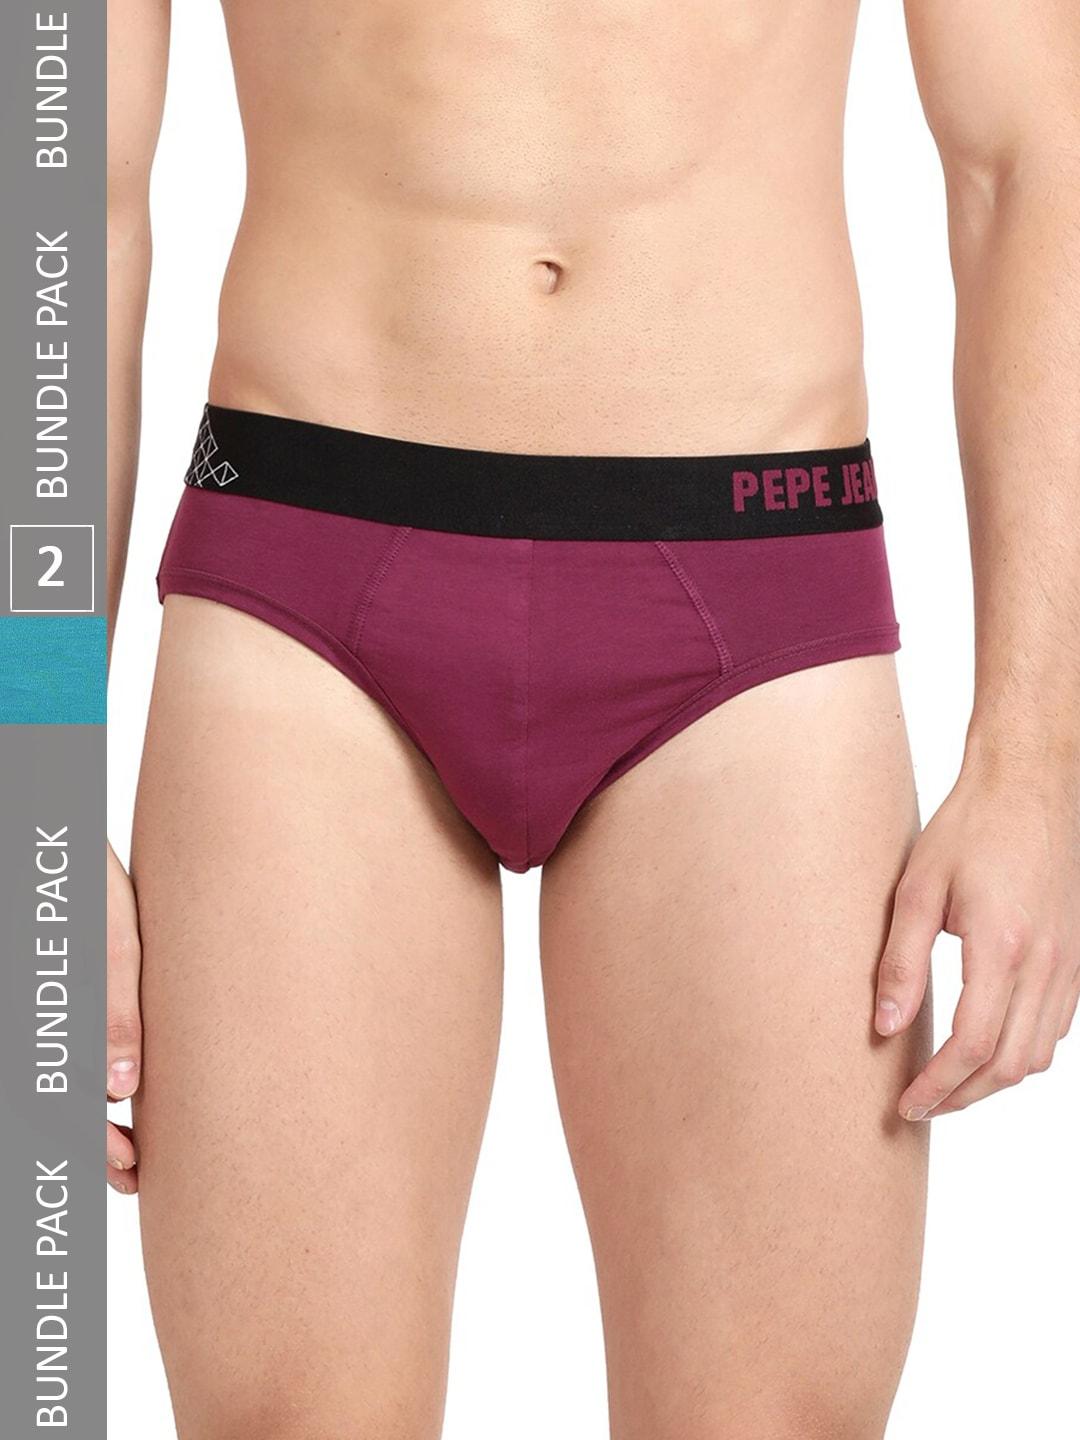 pepe jeans men pack of 2 cotton anti microbial low-rise basic briefs- 8904311371755